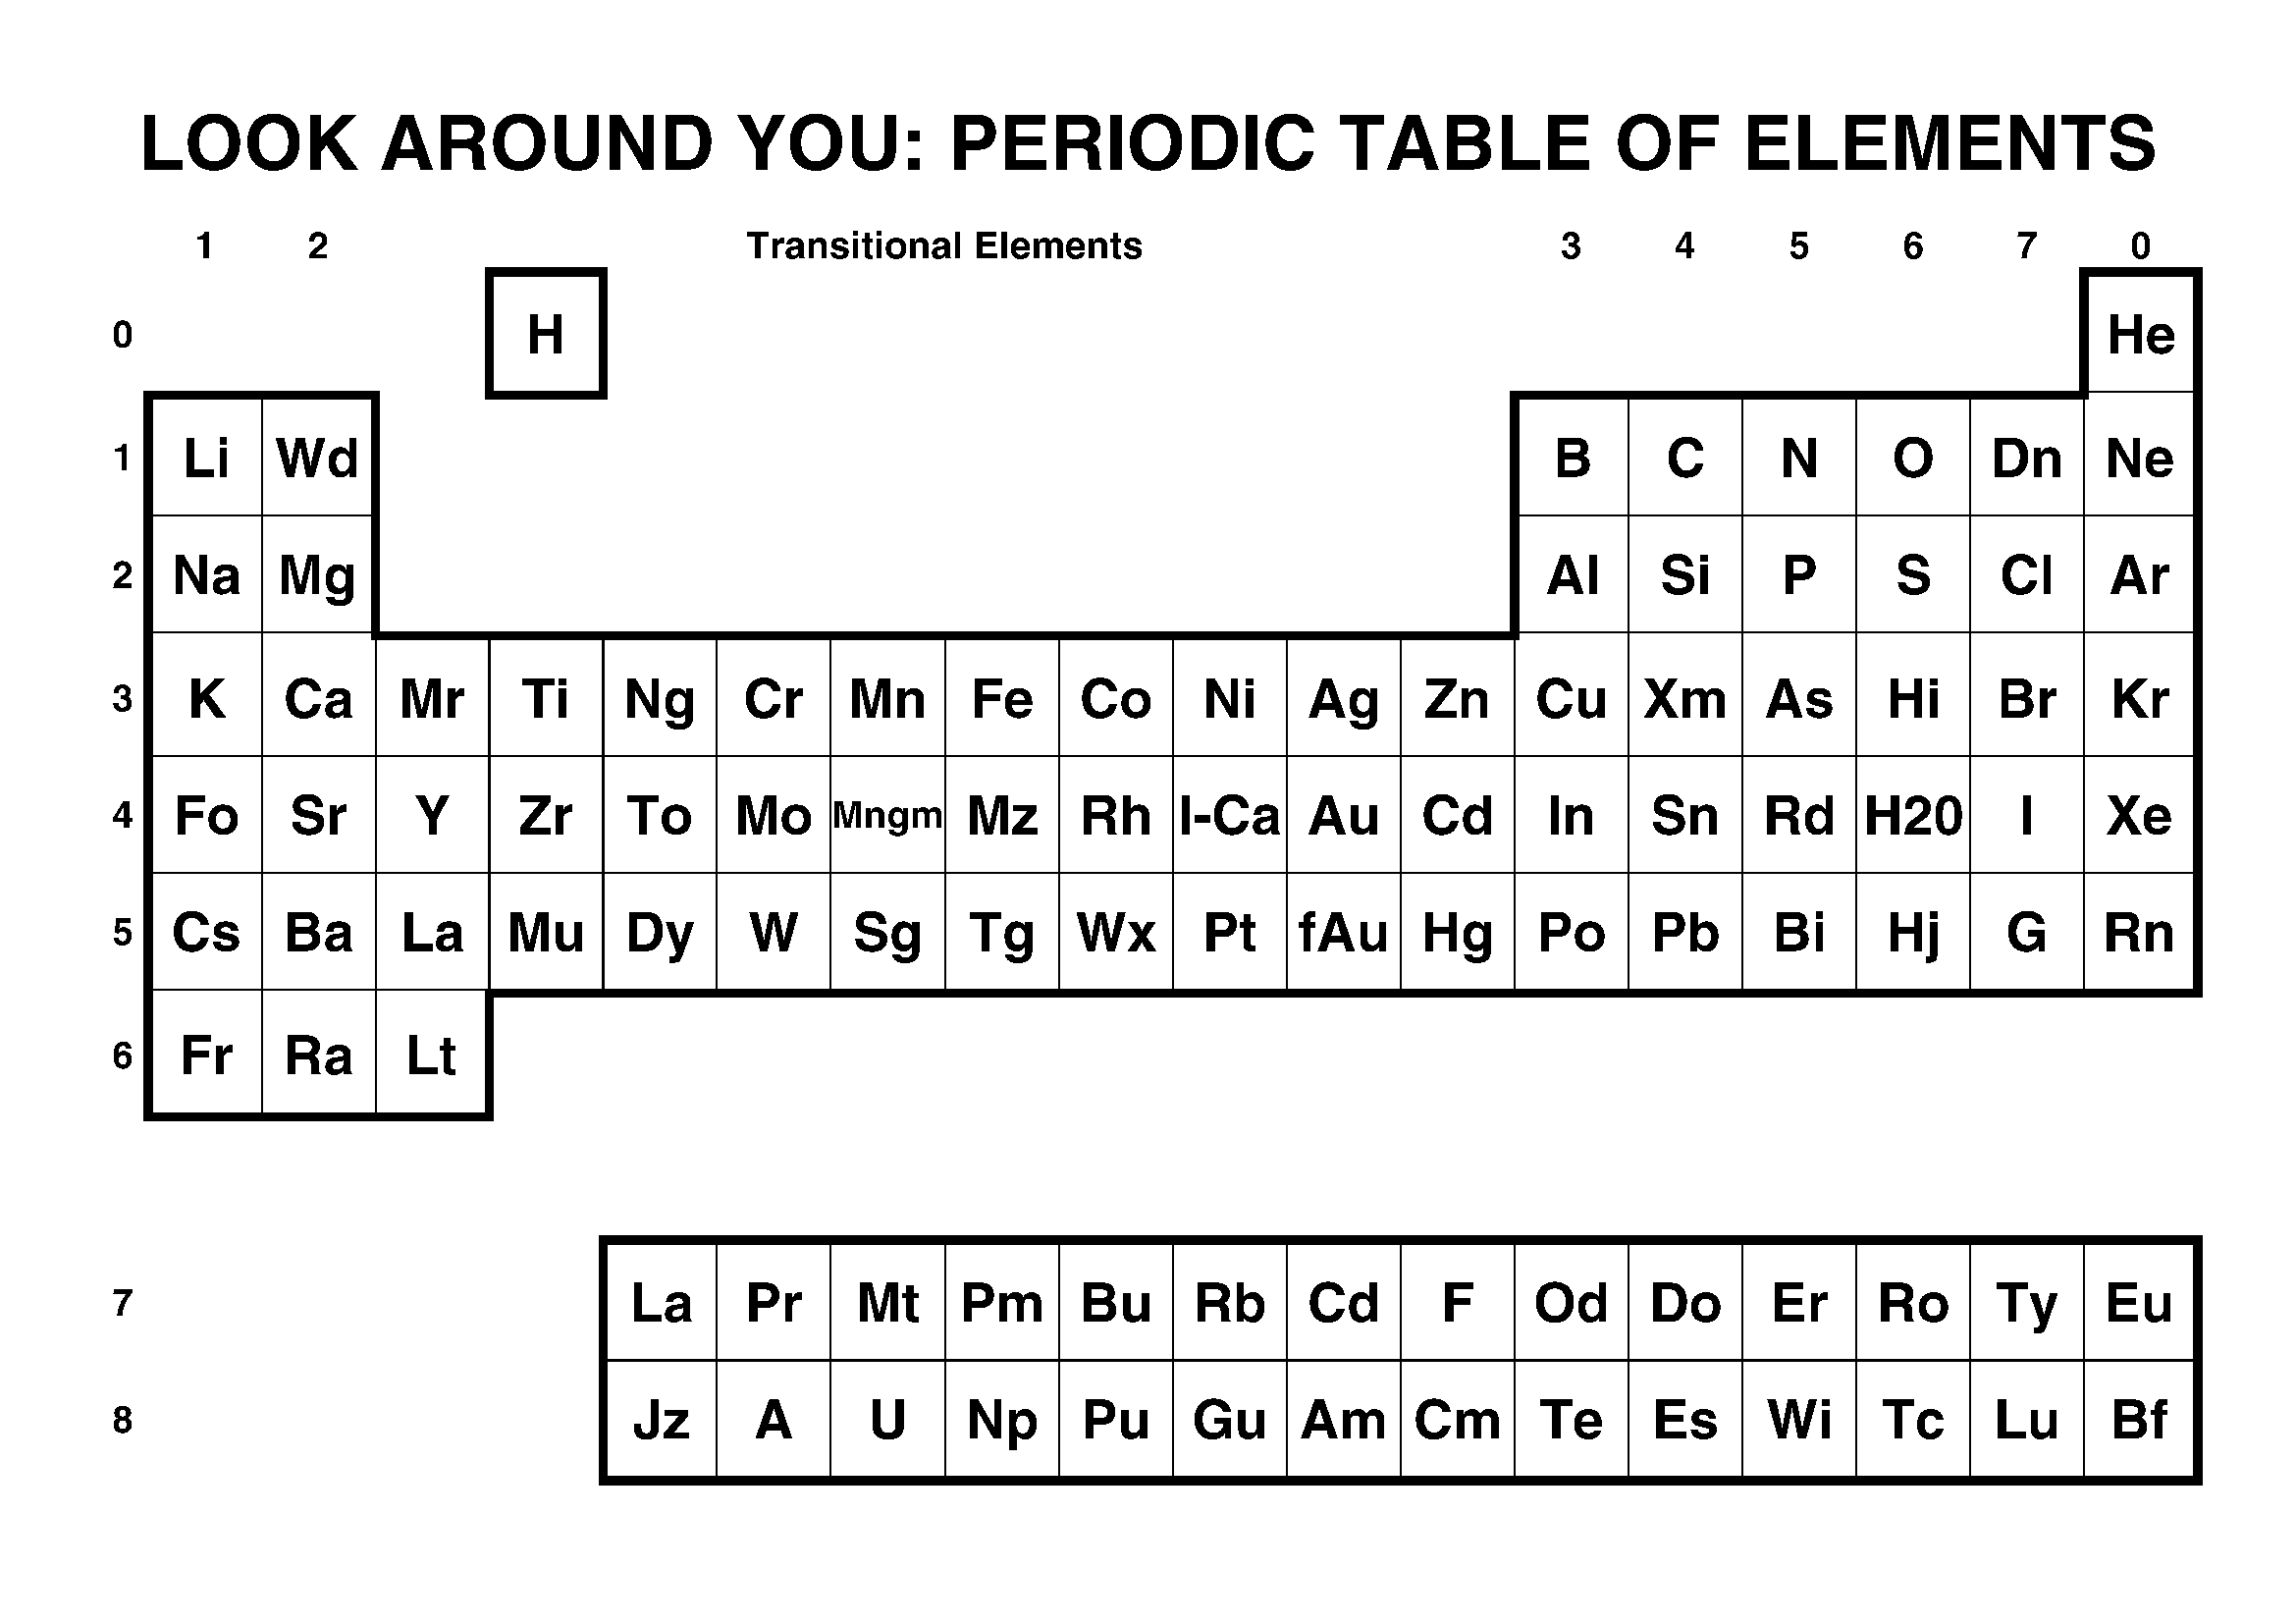 silicon atomic number